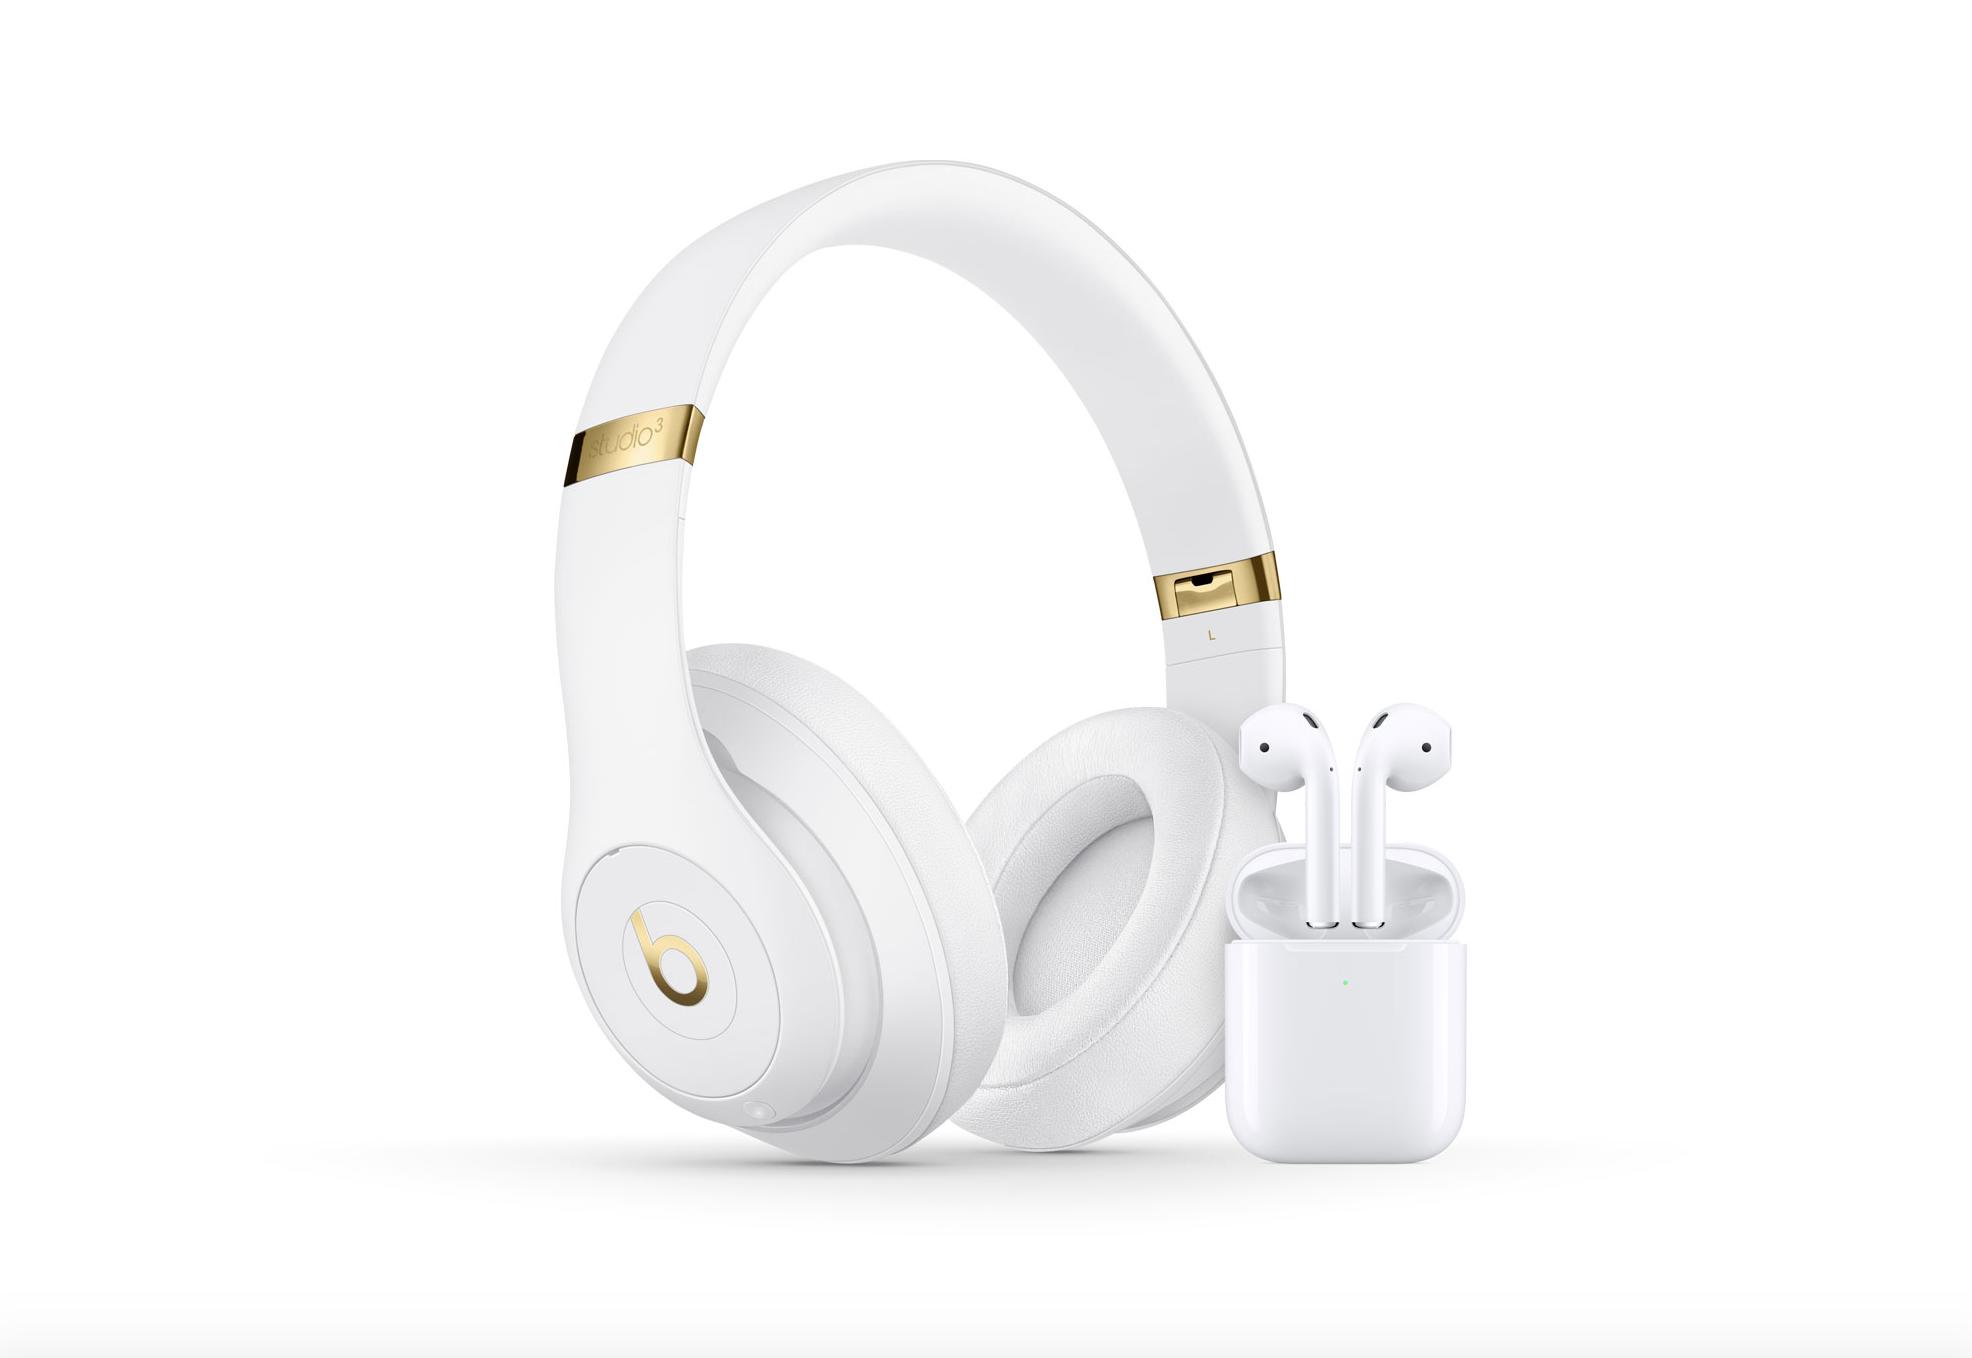 AirPods and Beats headphones